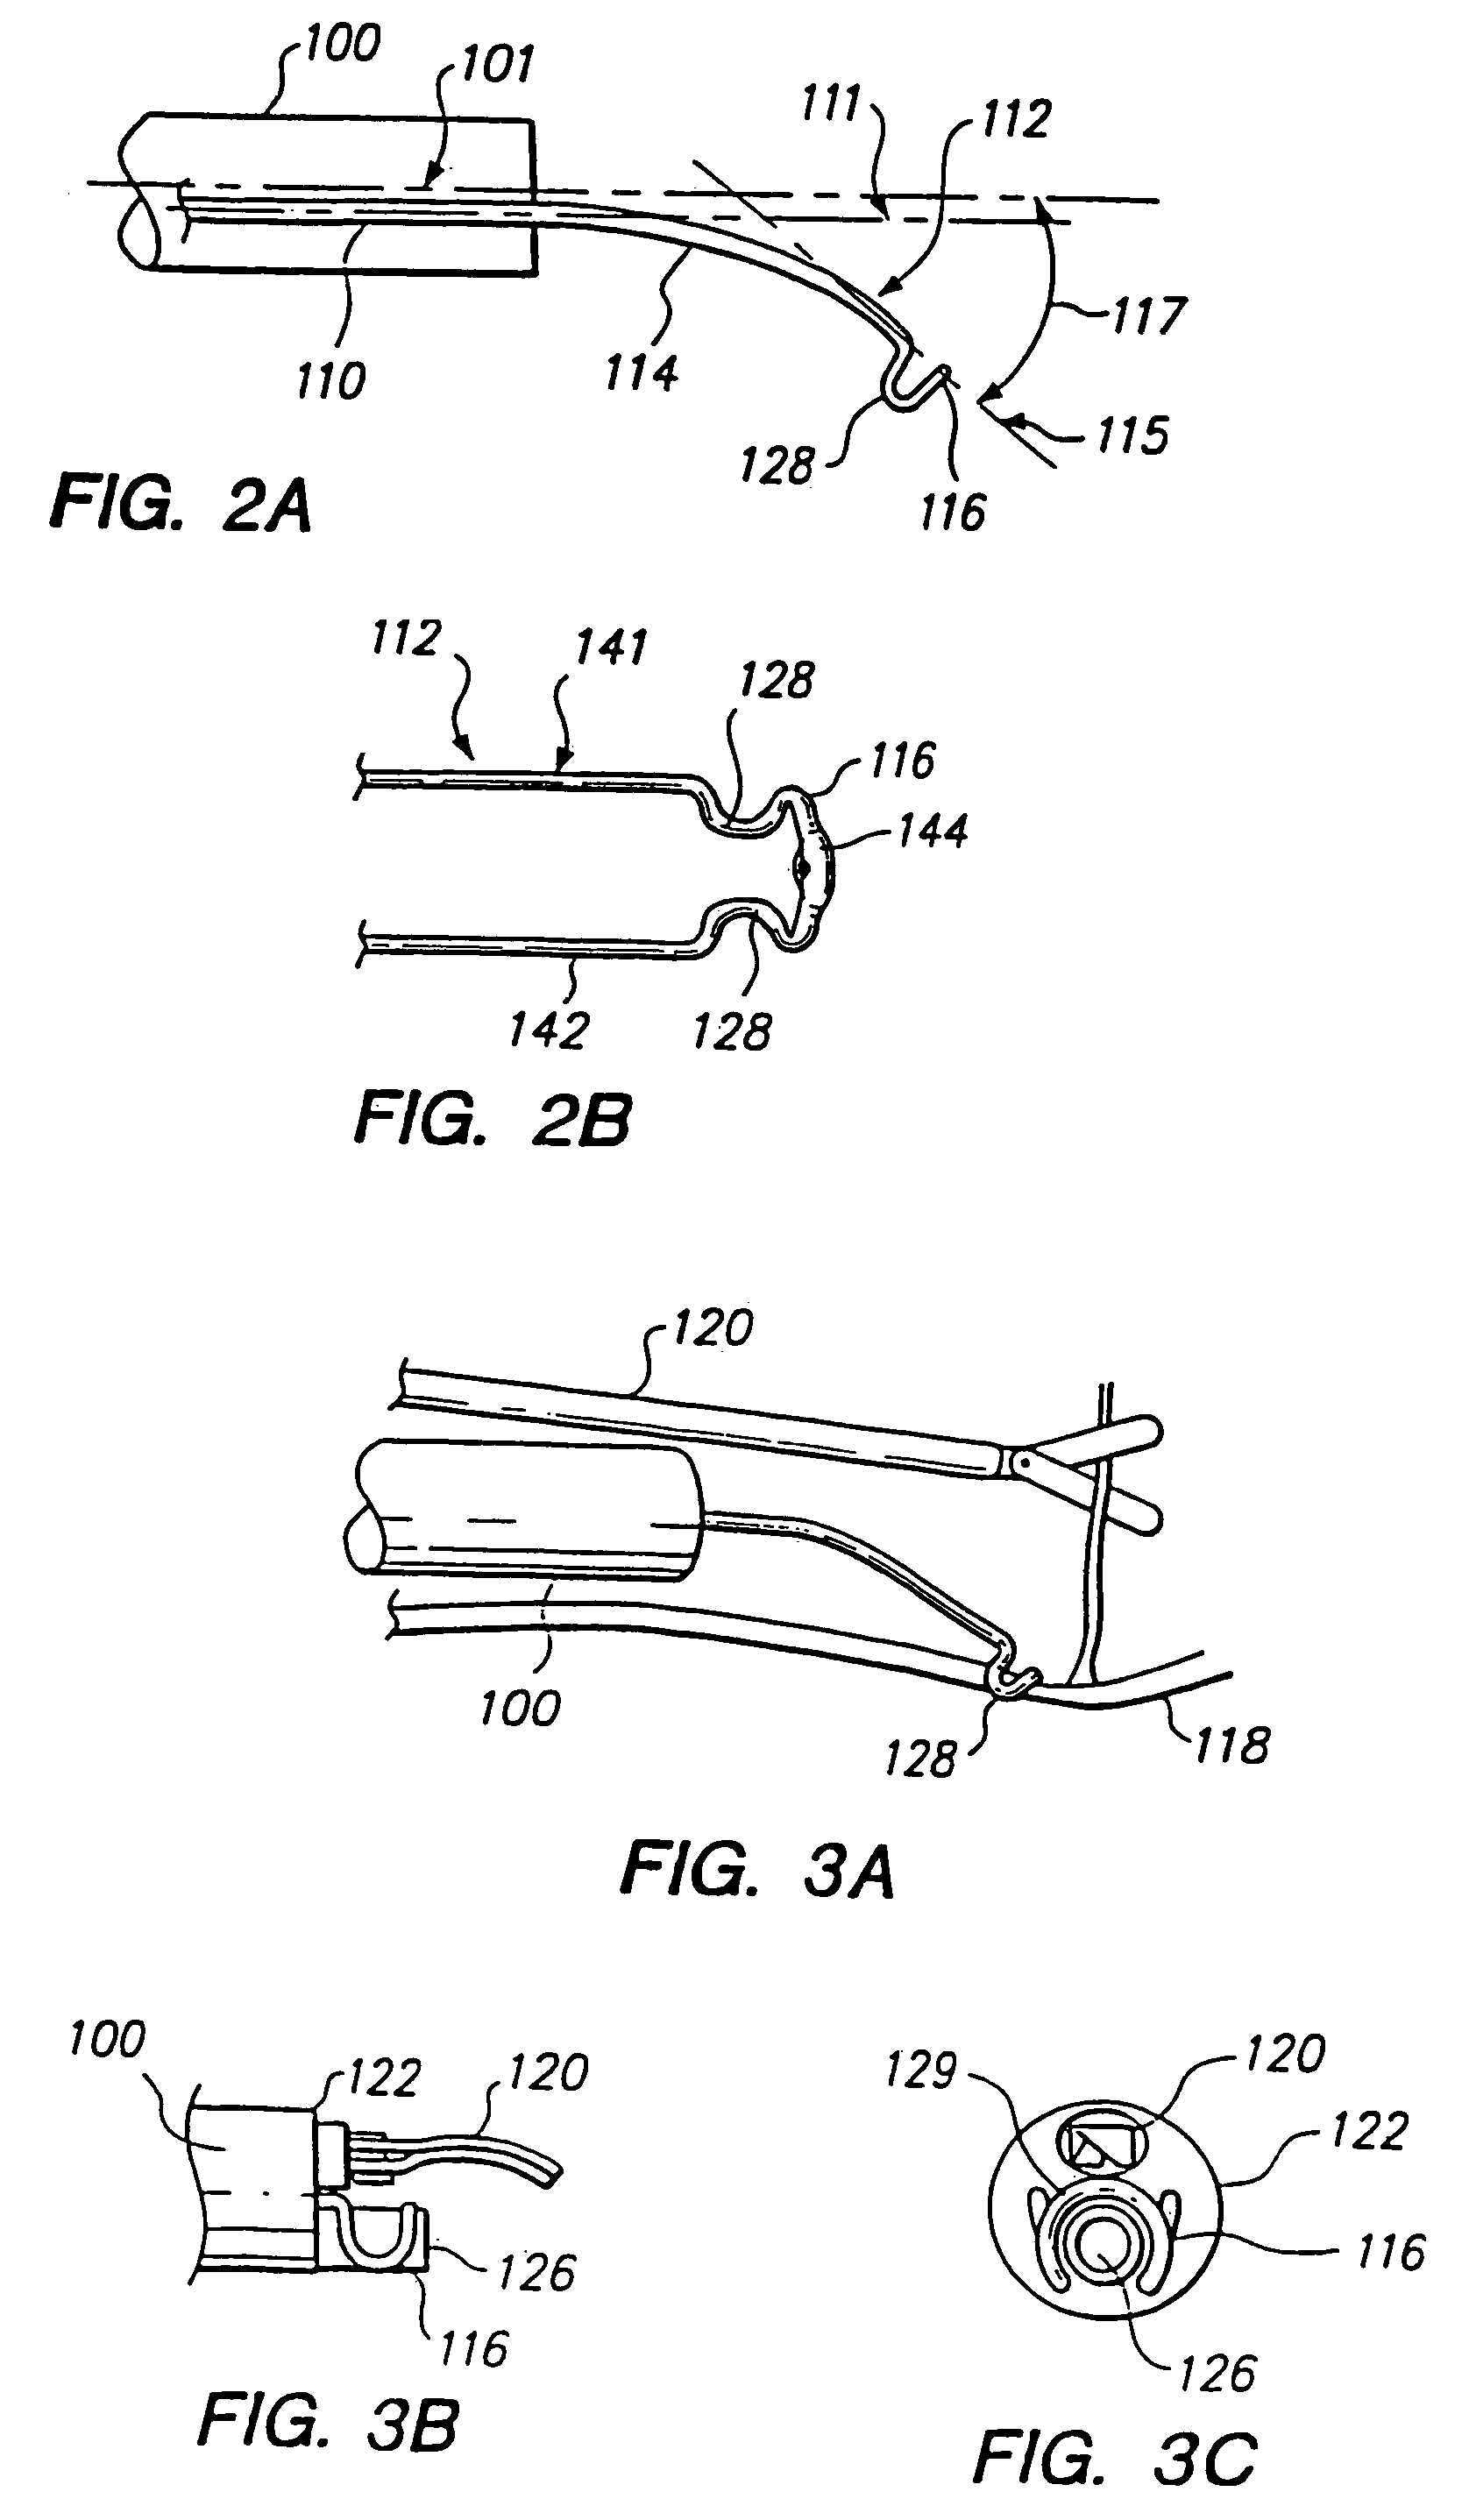 Cannula-based surgical instrument